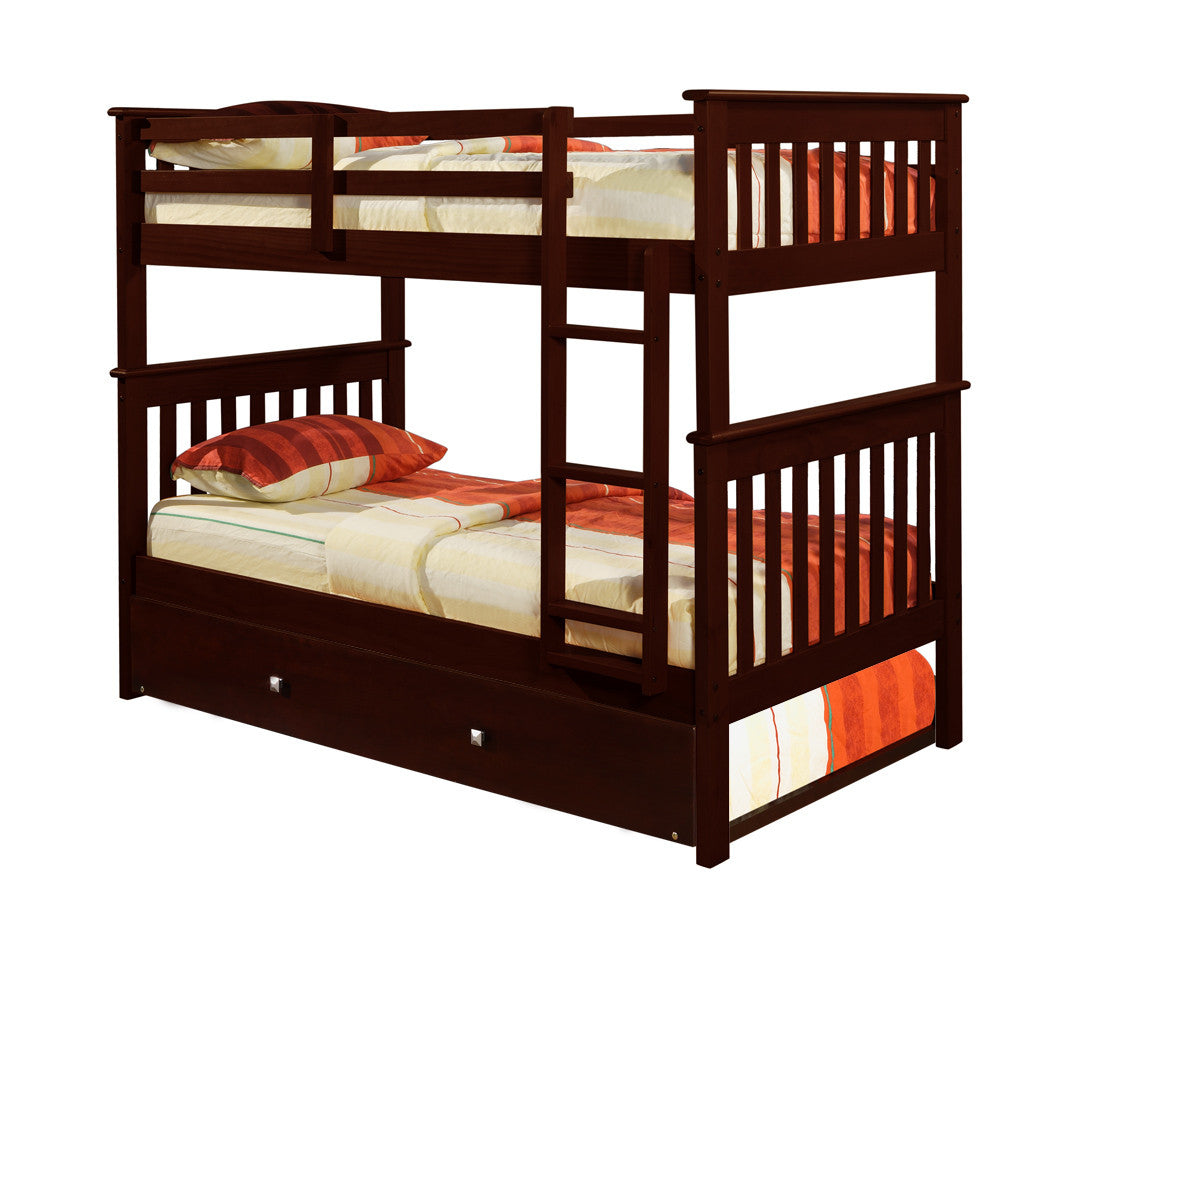 TWIN/TWIN MISSION BUNK BED WITH TRUNDLE BED CAPPUCCINO FINISH